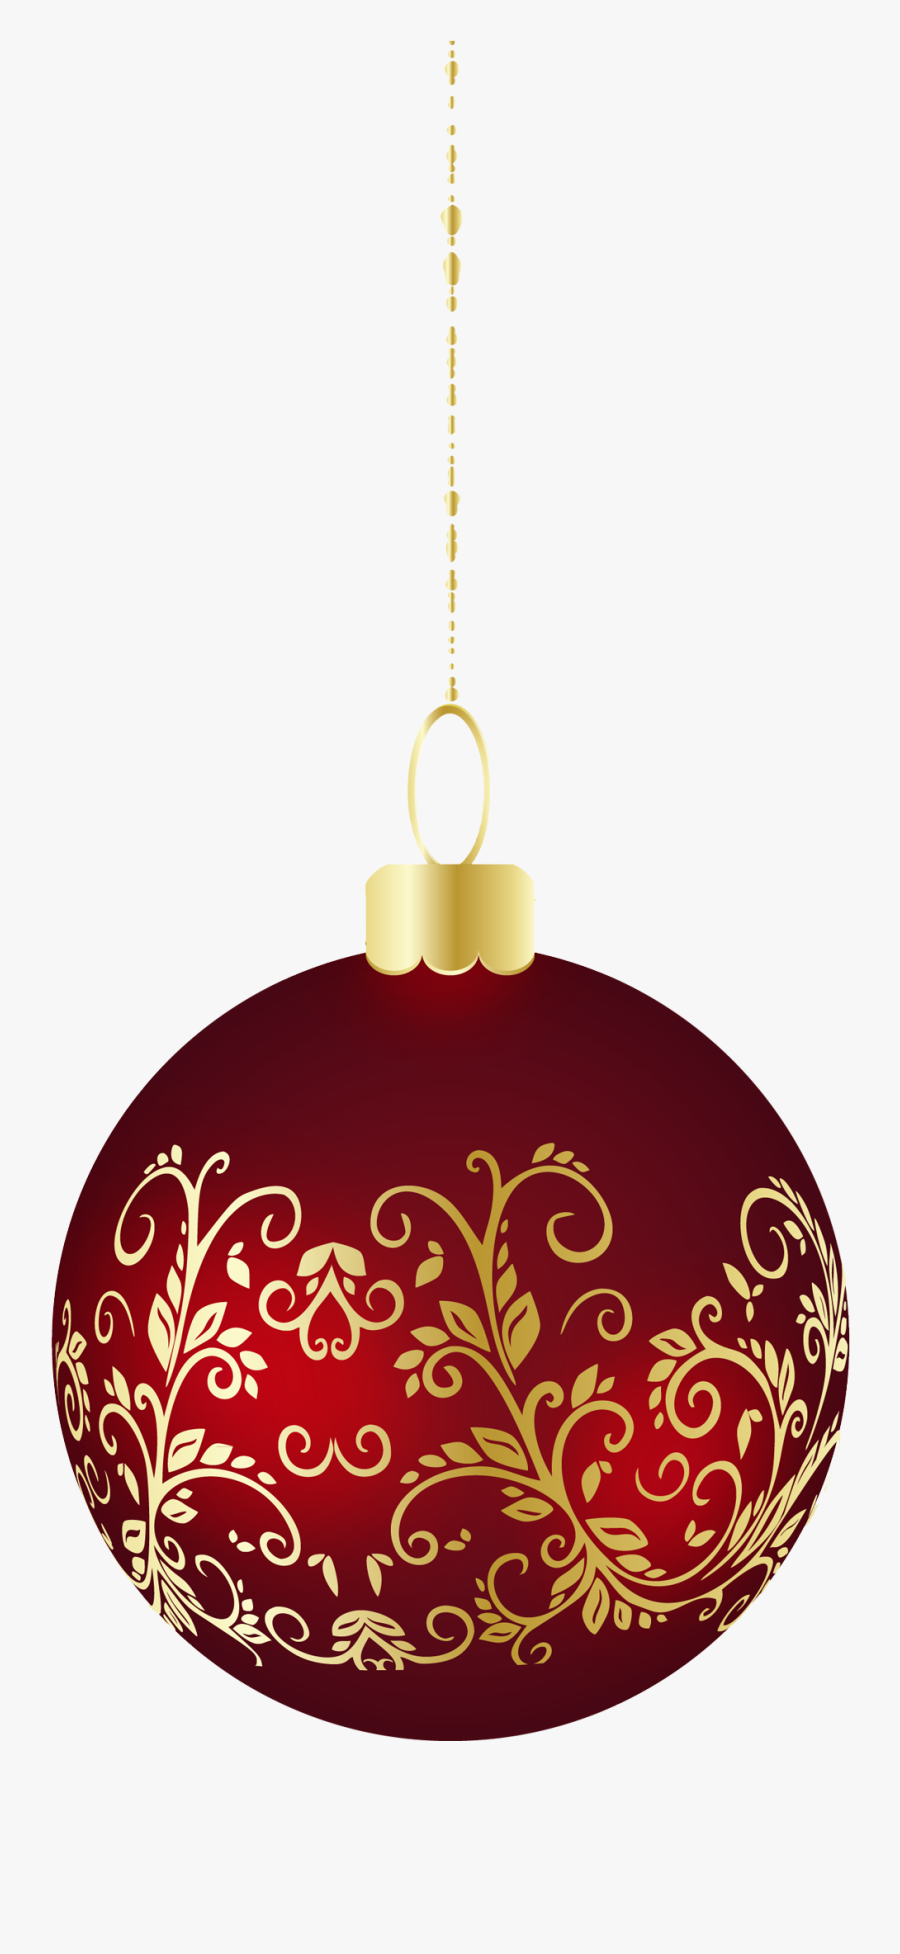 Christmas Ornaments Free Png, Transparent Clipart